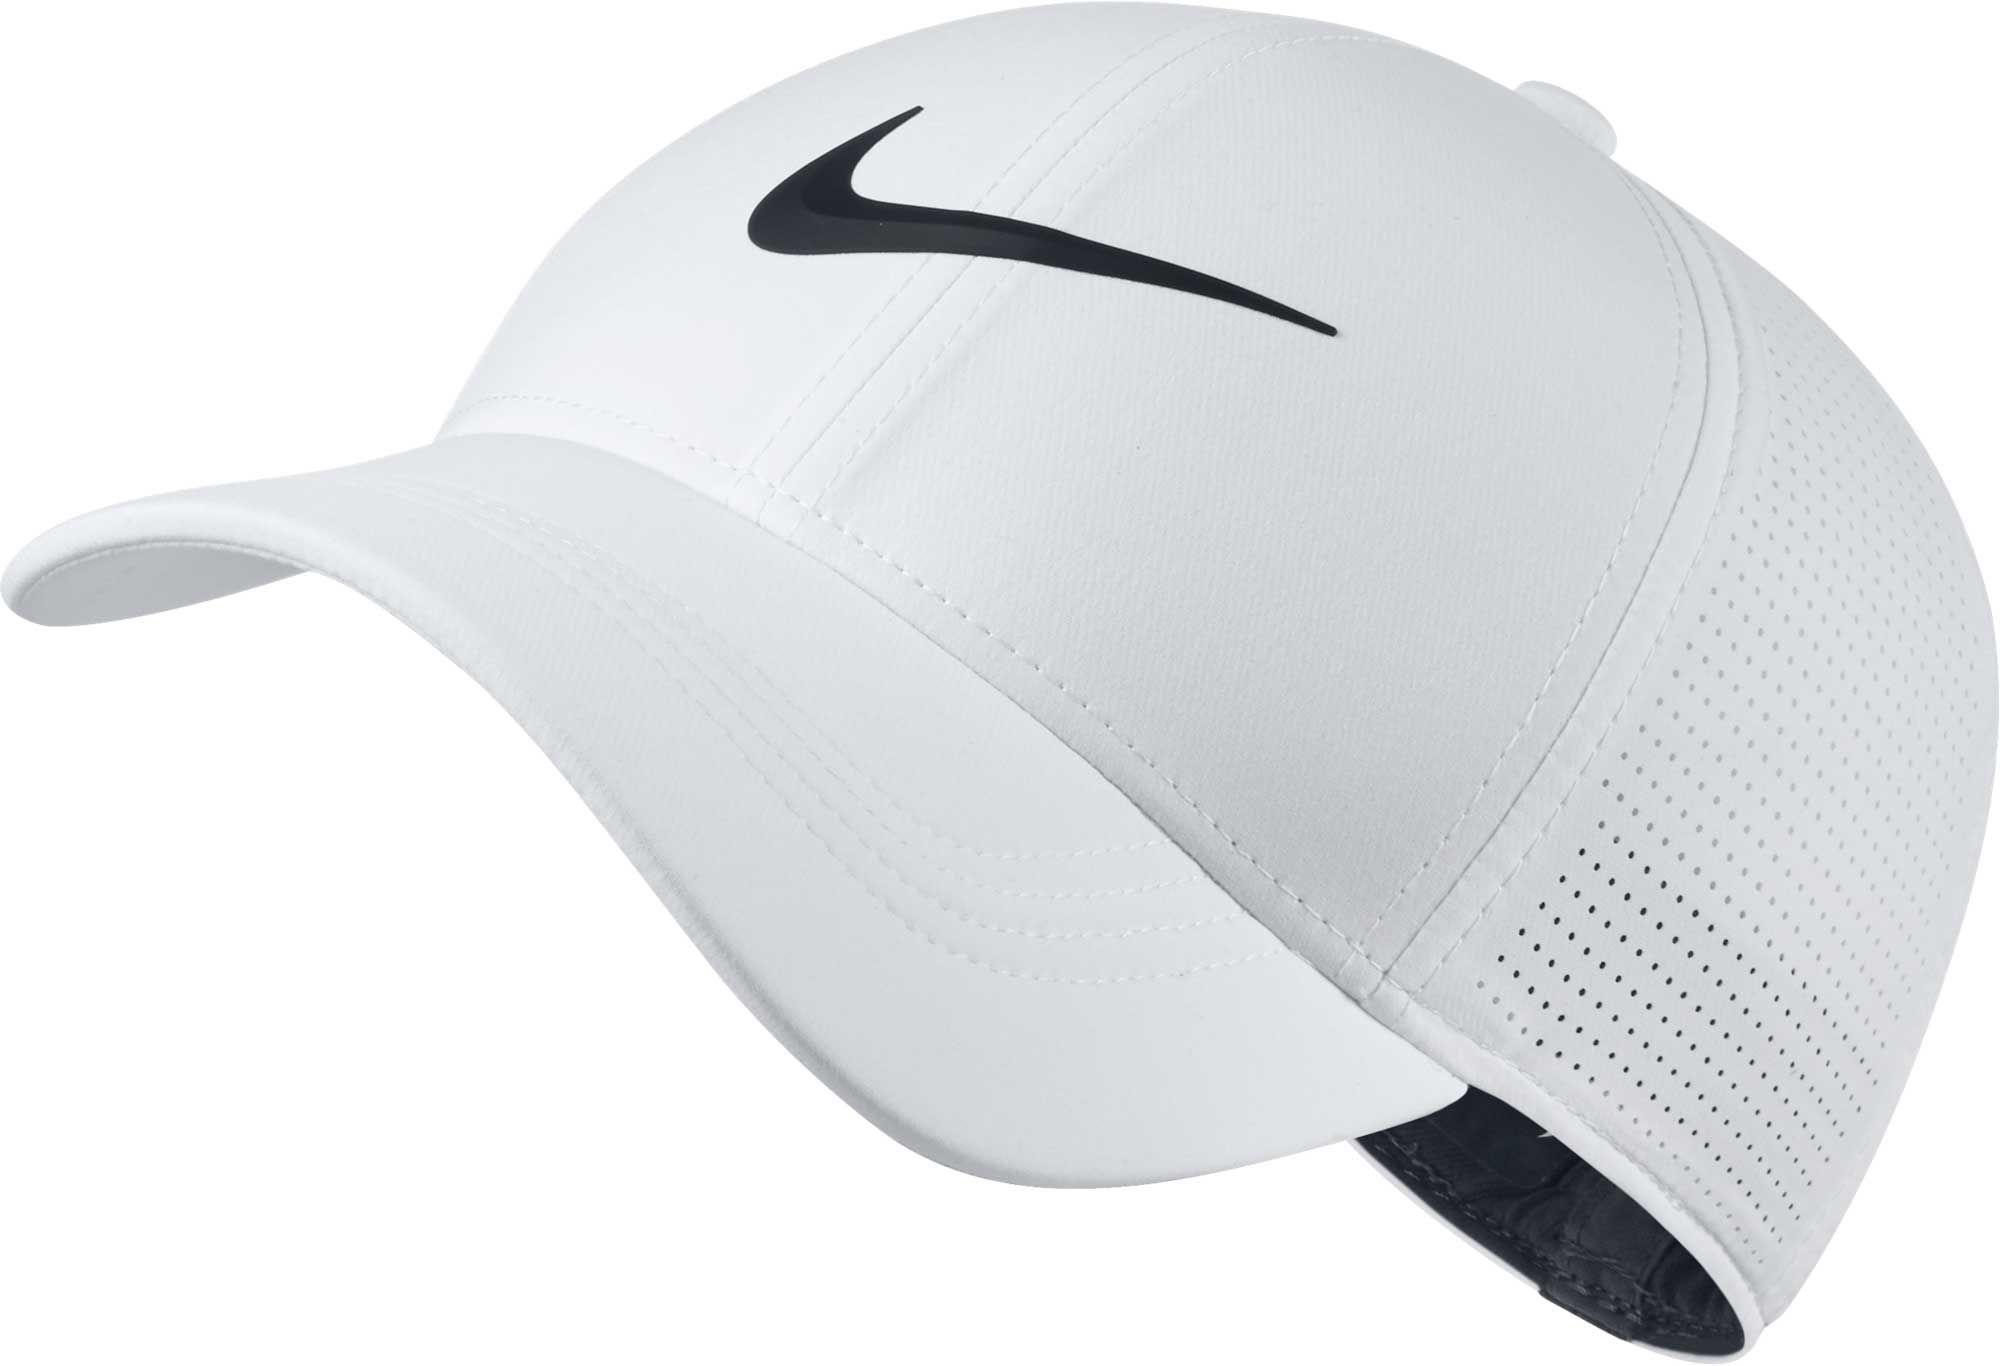 nike legacy 91 hat perforated